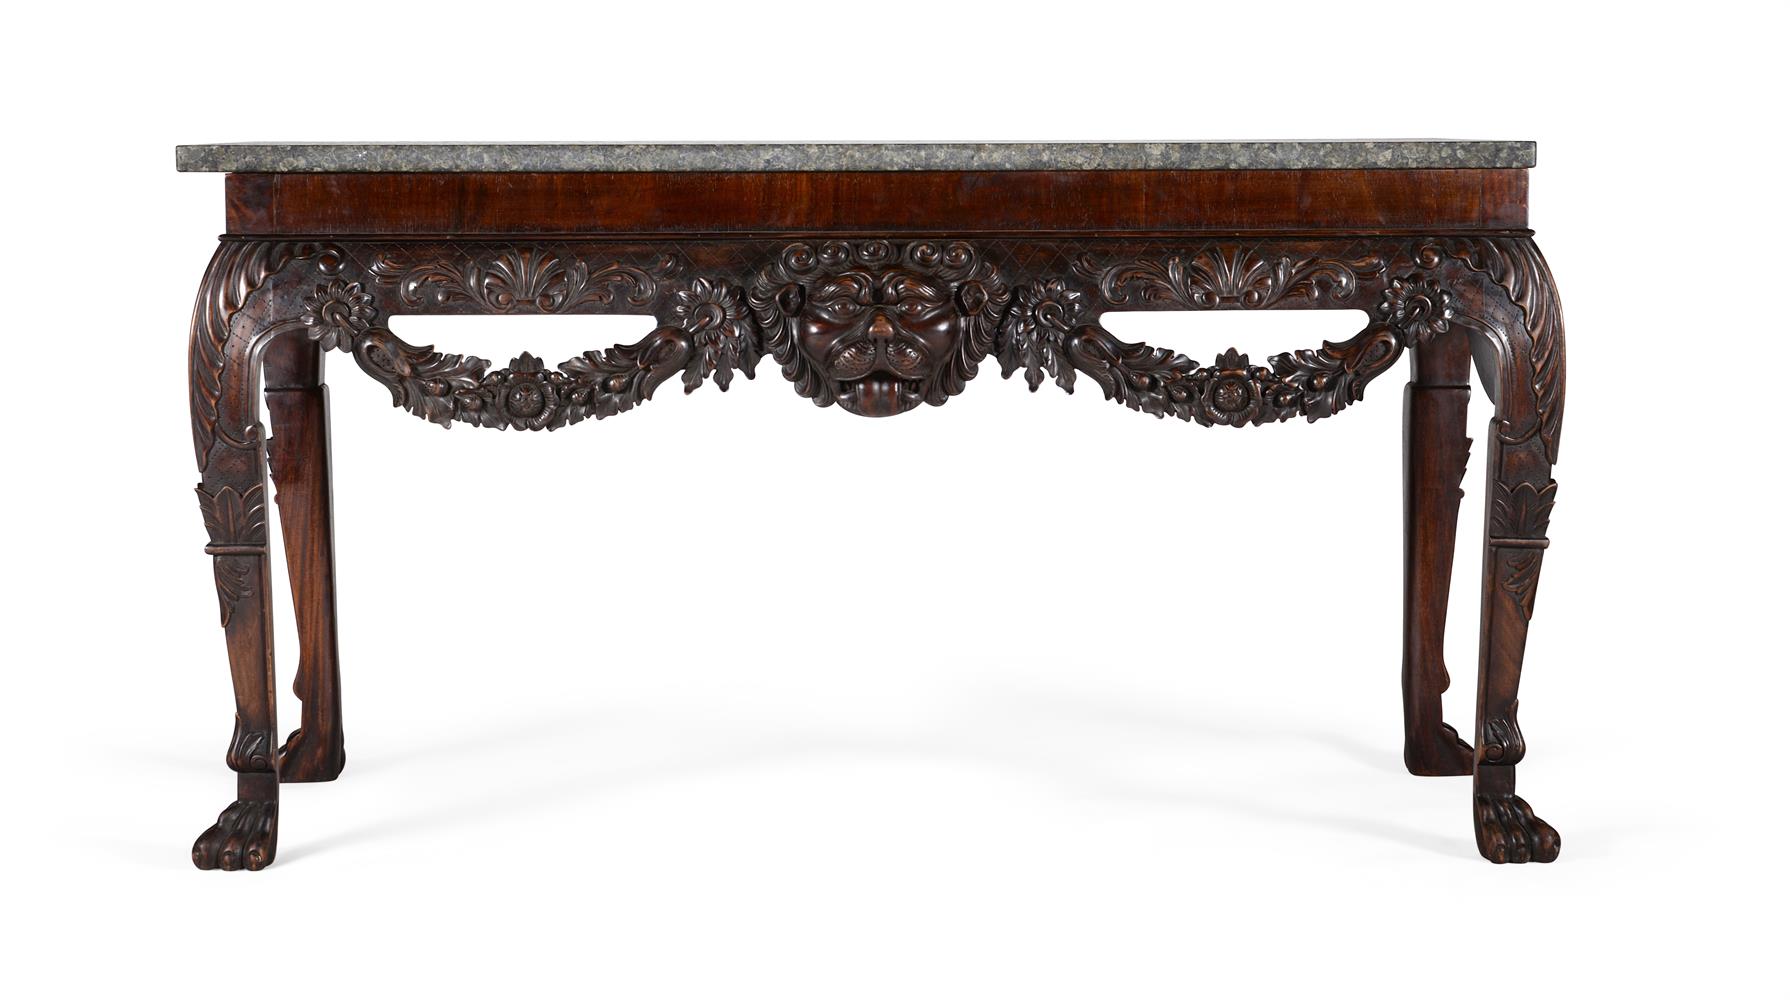 A CARVED MAHOGANY CONSOLE TABLE, IN IRISH 18TH CENTURY STYLE